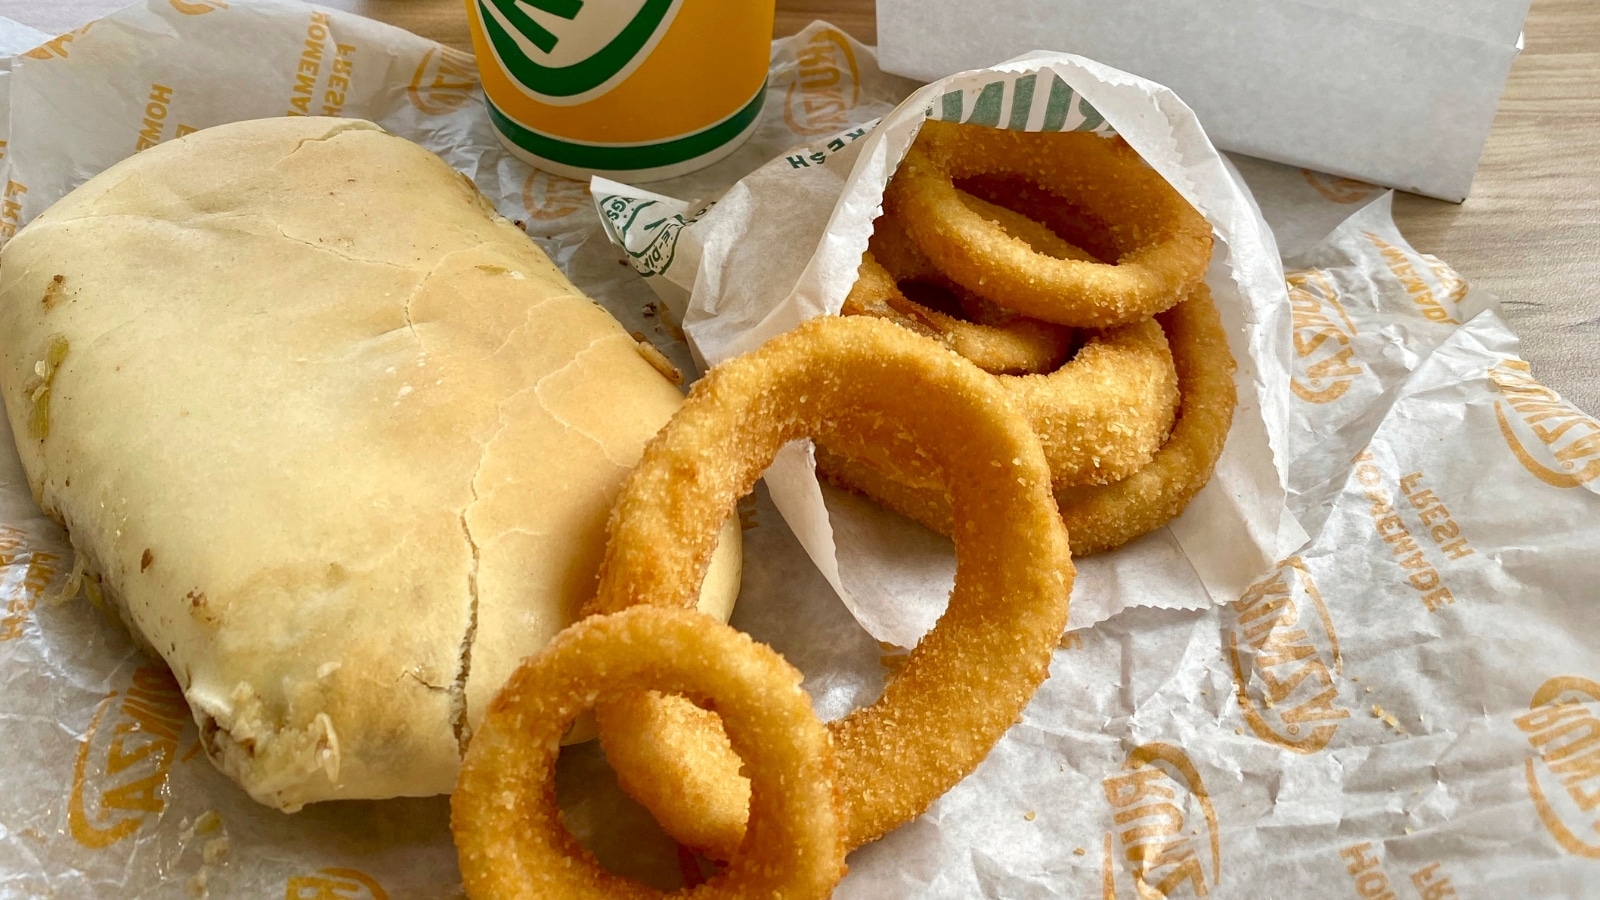 Omaha, Nebraska - 2021: Runza Restaurant meal with a Runza sandwich, onion rings, and drink. Bag with Runza logo and "Runza makes it all better" motto.